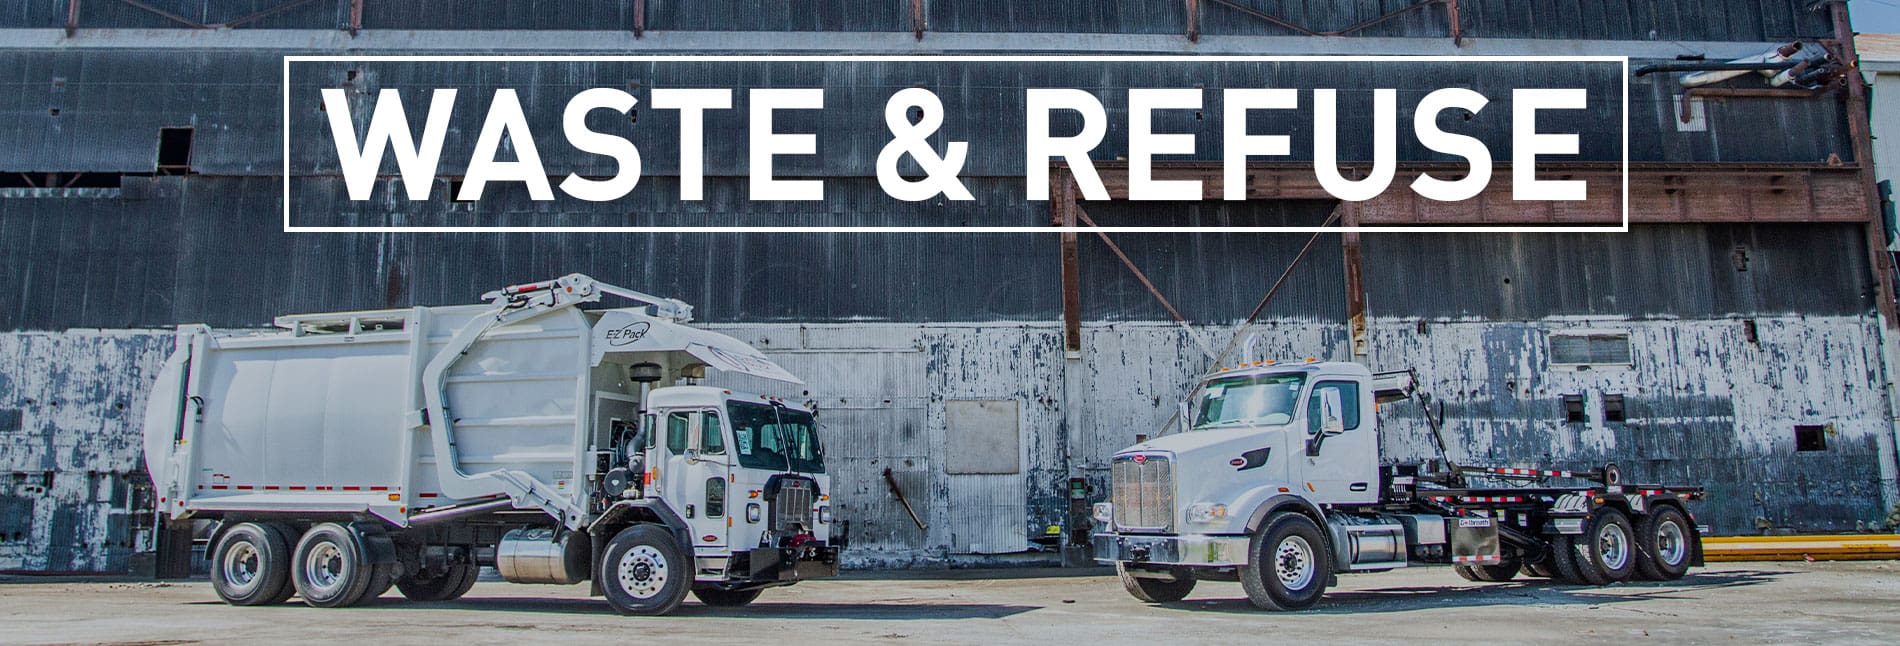 waste and refuse industry